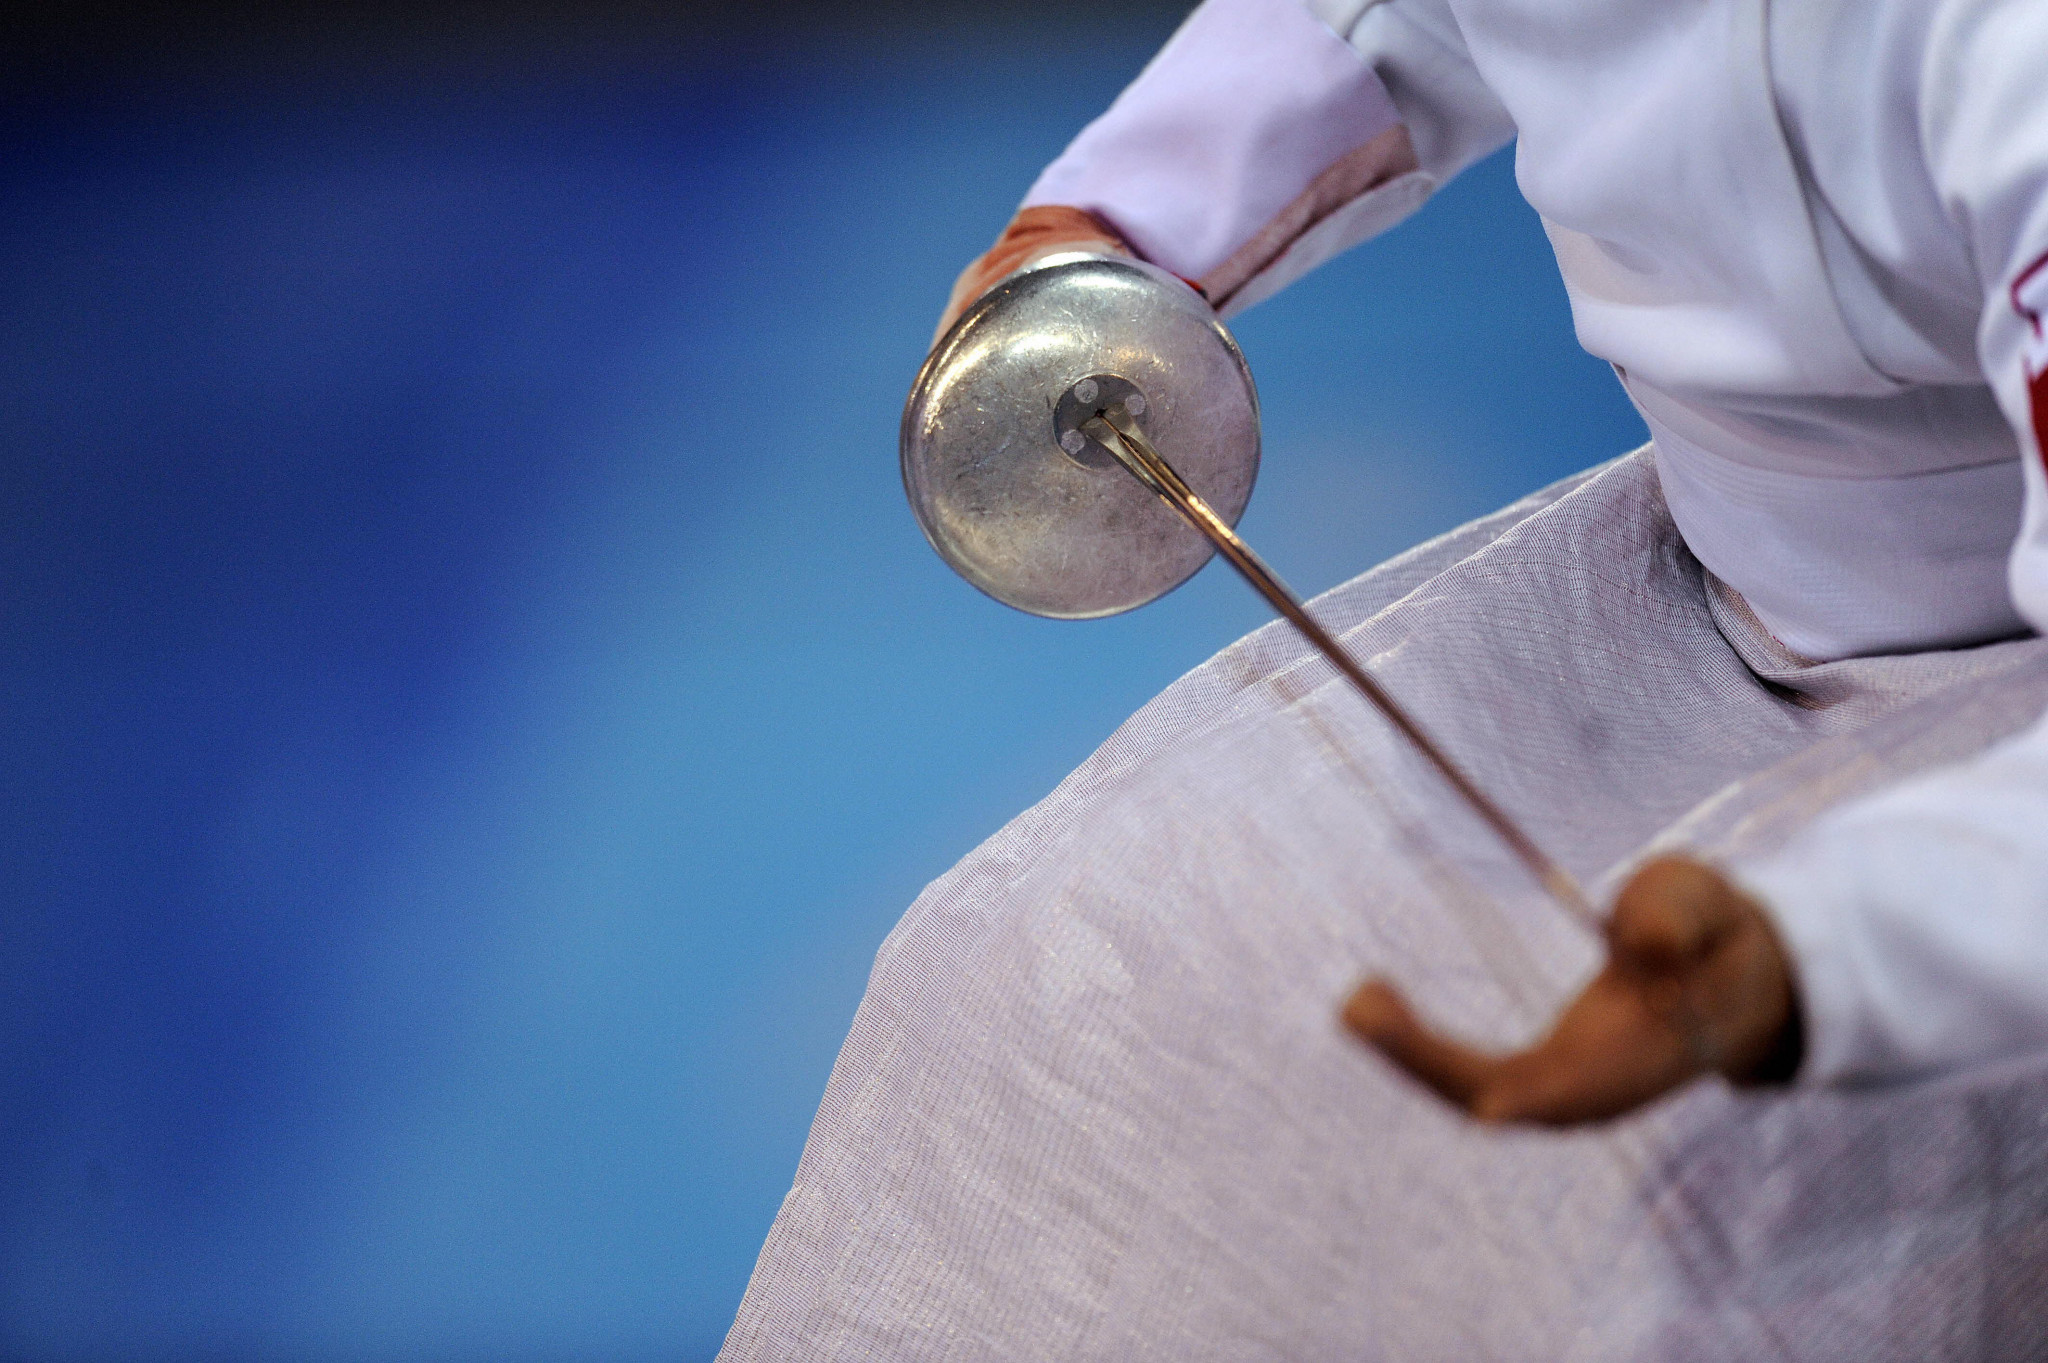 The Wheelchair Fencing Satellite World Cup is aimed at encouraging more nations to compete internationally ©Getty Images